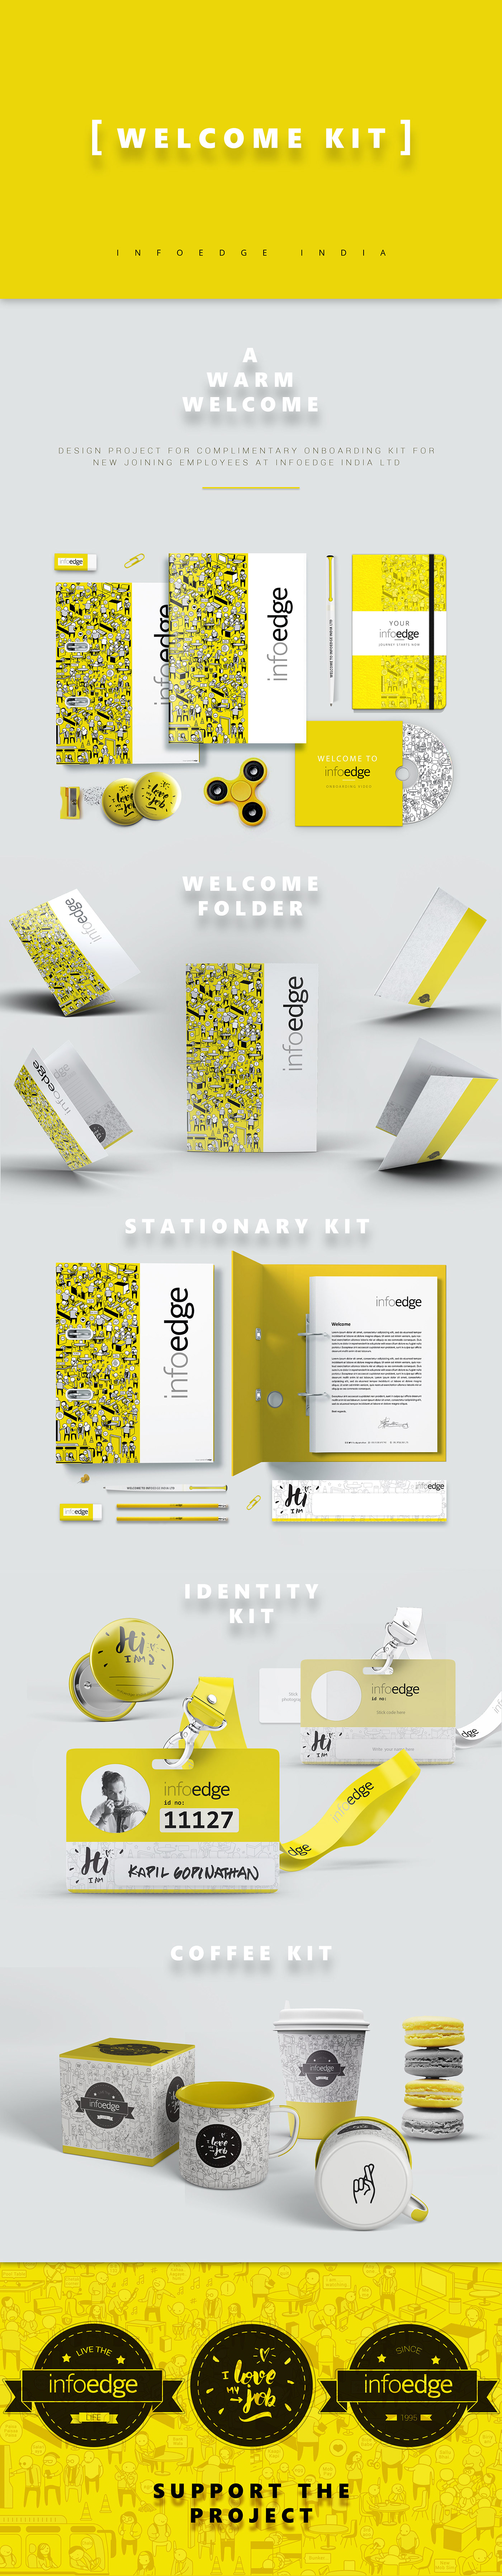 brand infoedge welcome kit ILLUSTRATION  On Boarding graphic design  Character design  yellow branding  Office culture